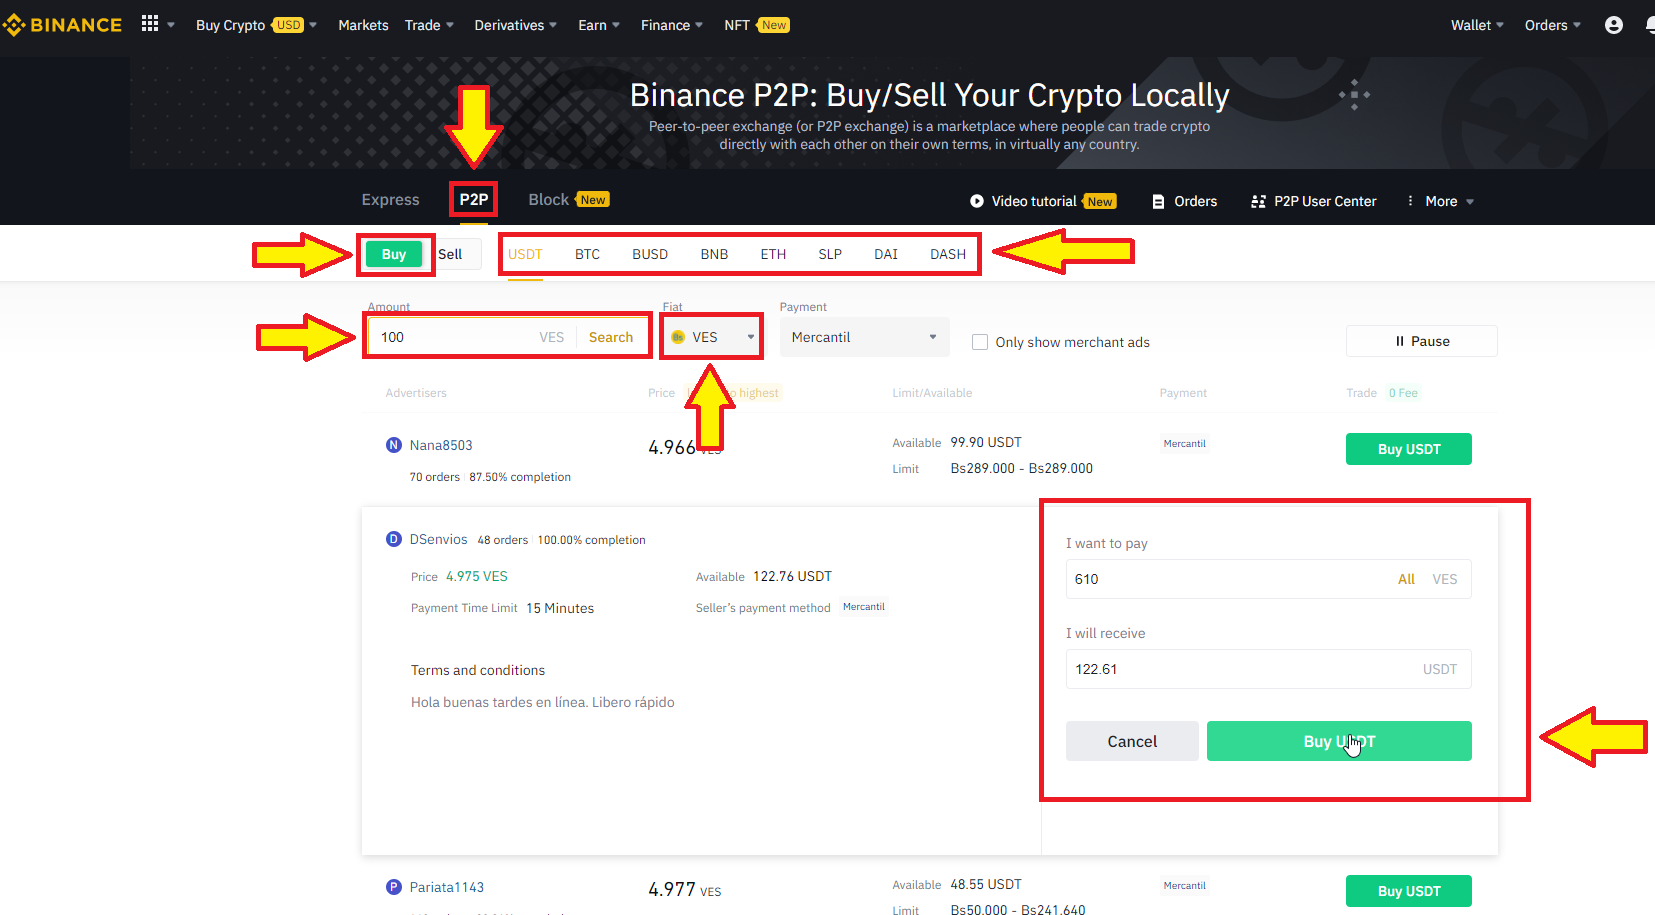 Buy BNBeer crypto in P2P with a verified account on Binance